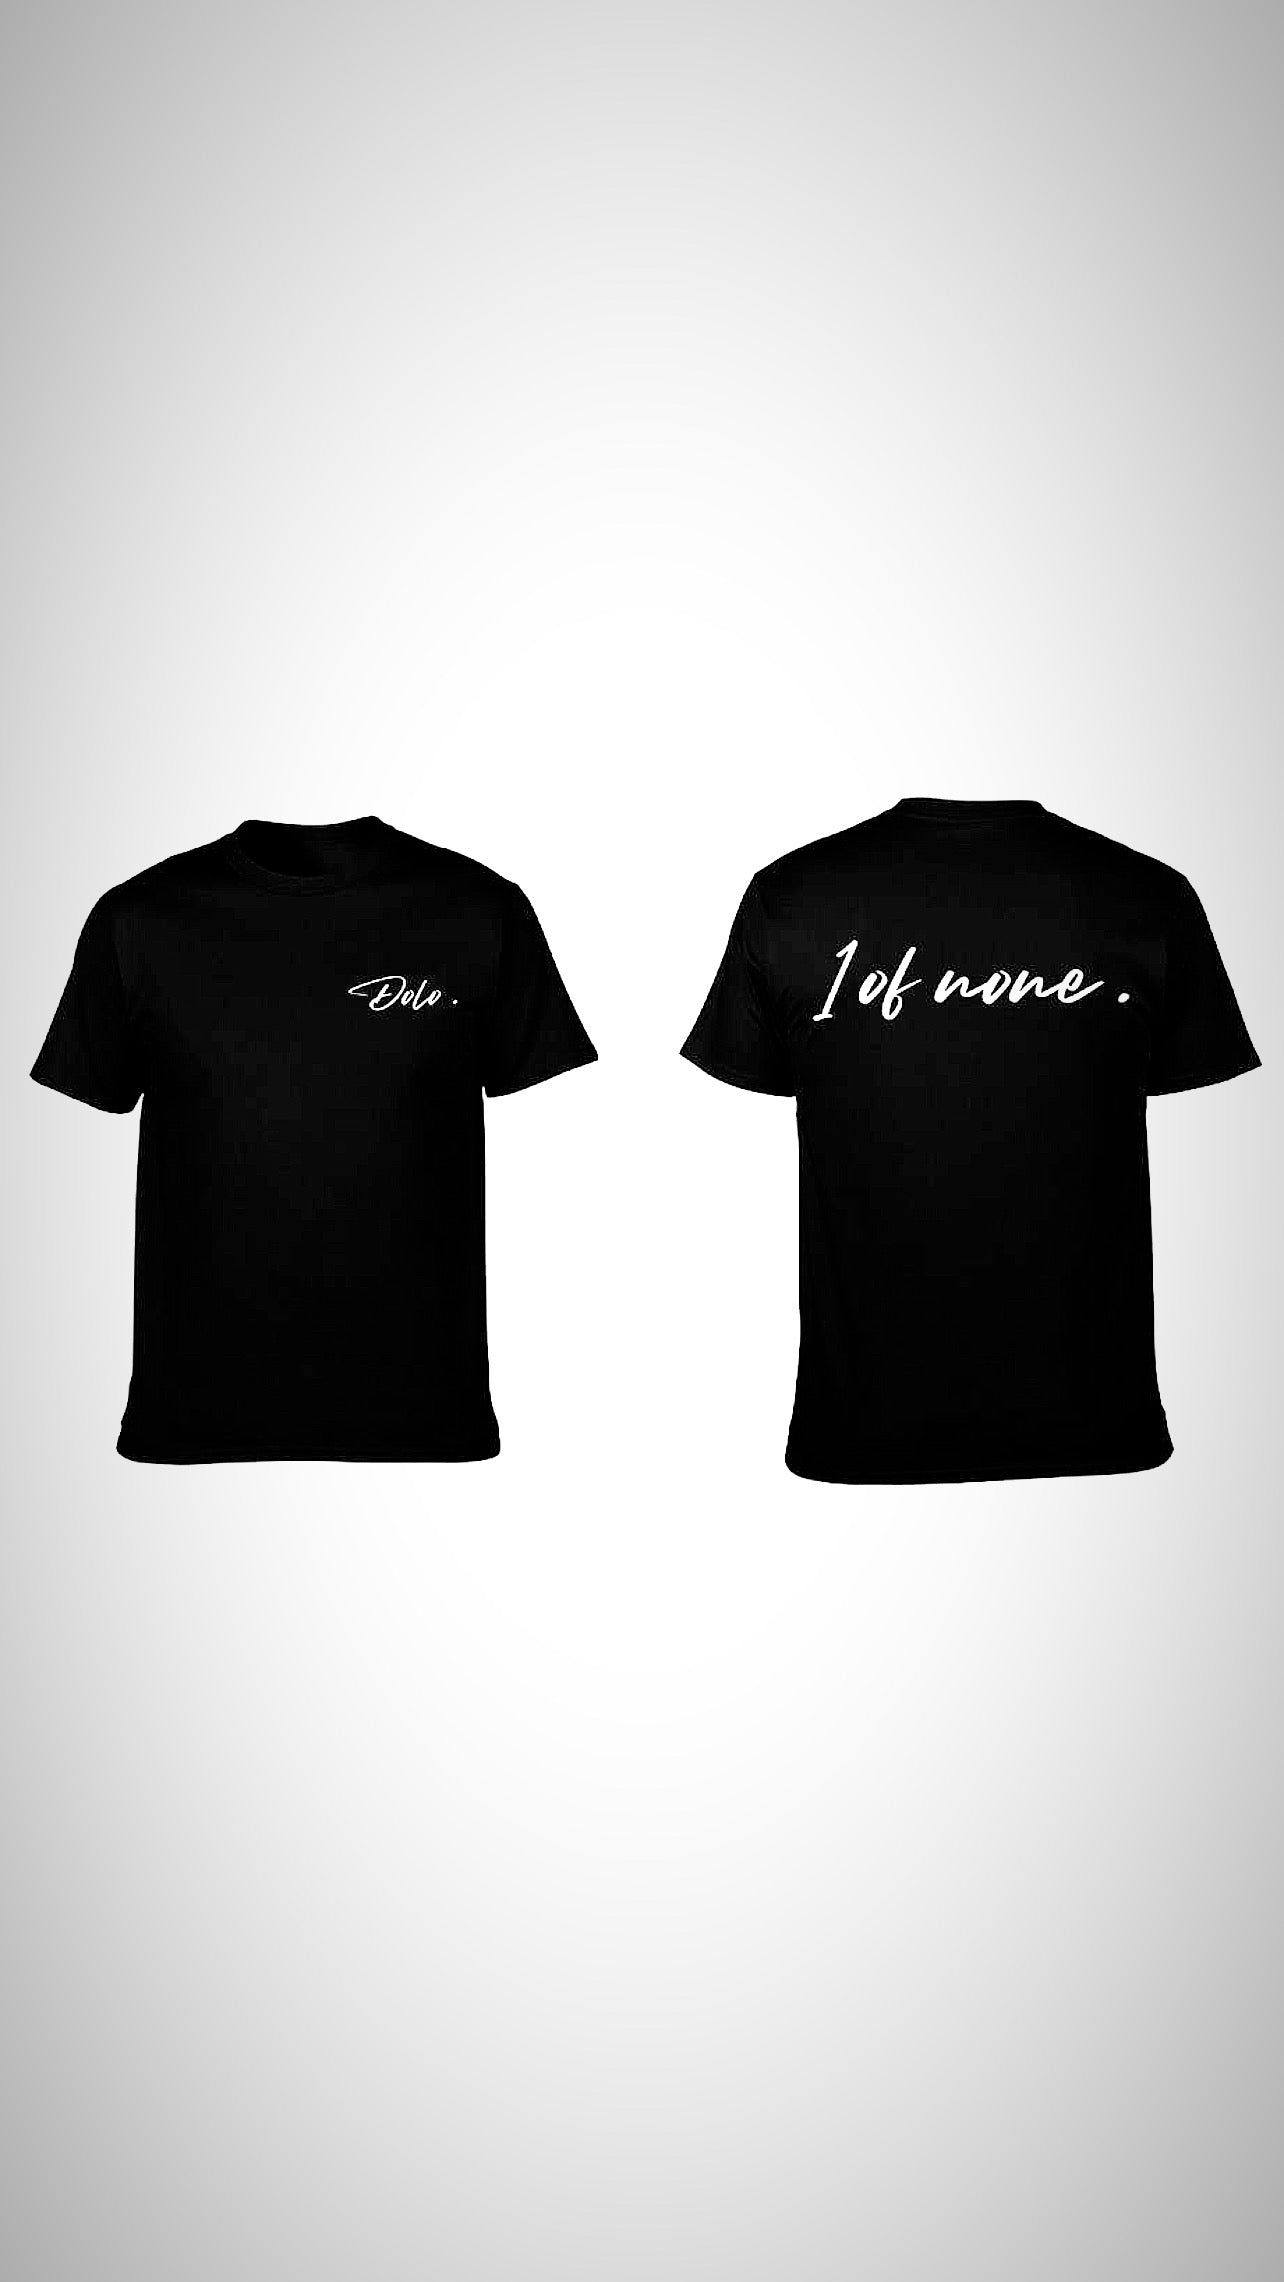 “1 of none “ Collection OG Shirt